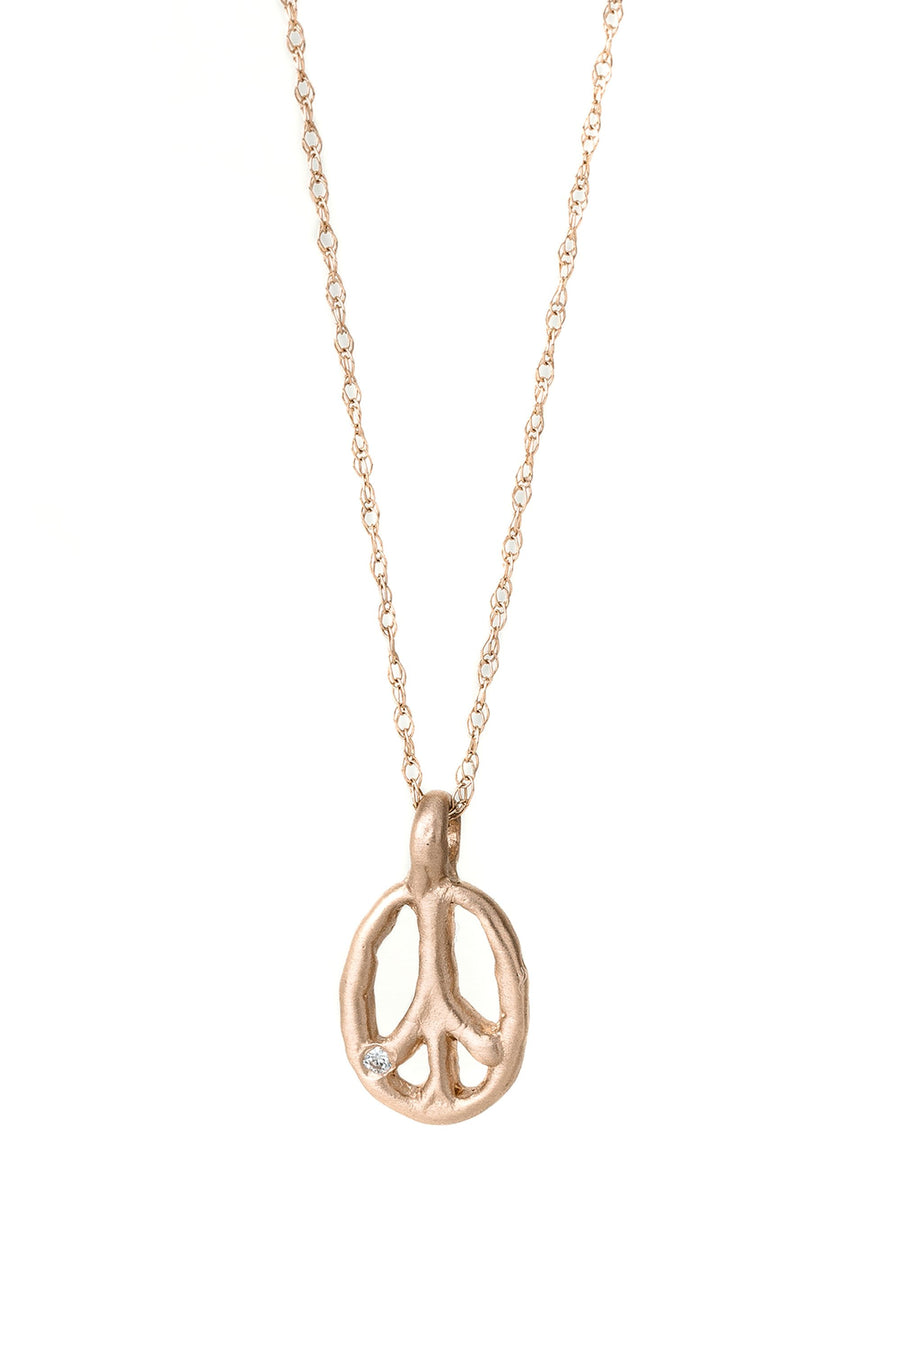 Charmed Peace Sign Necklace - 14k Gold